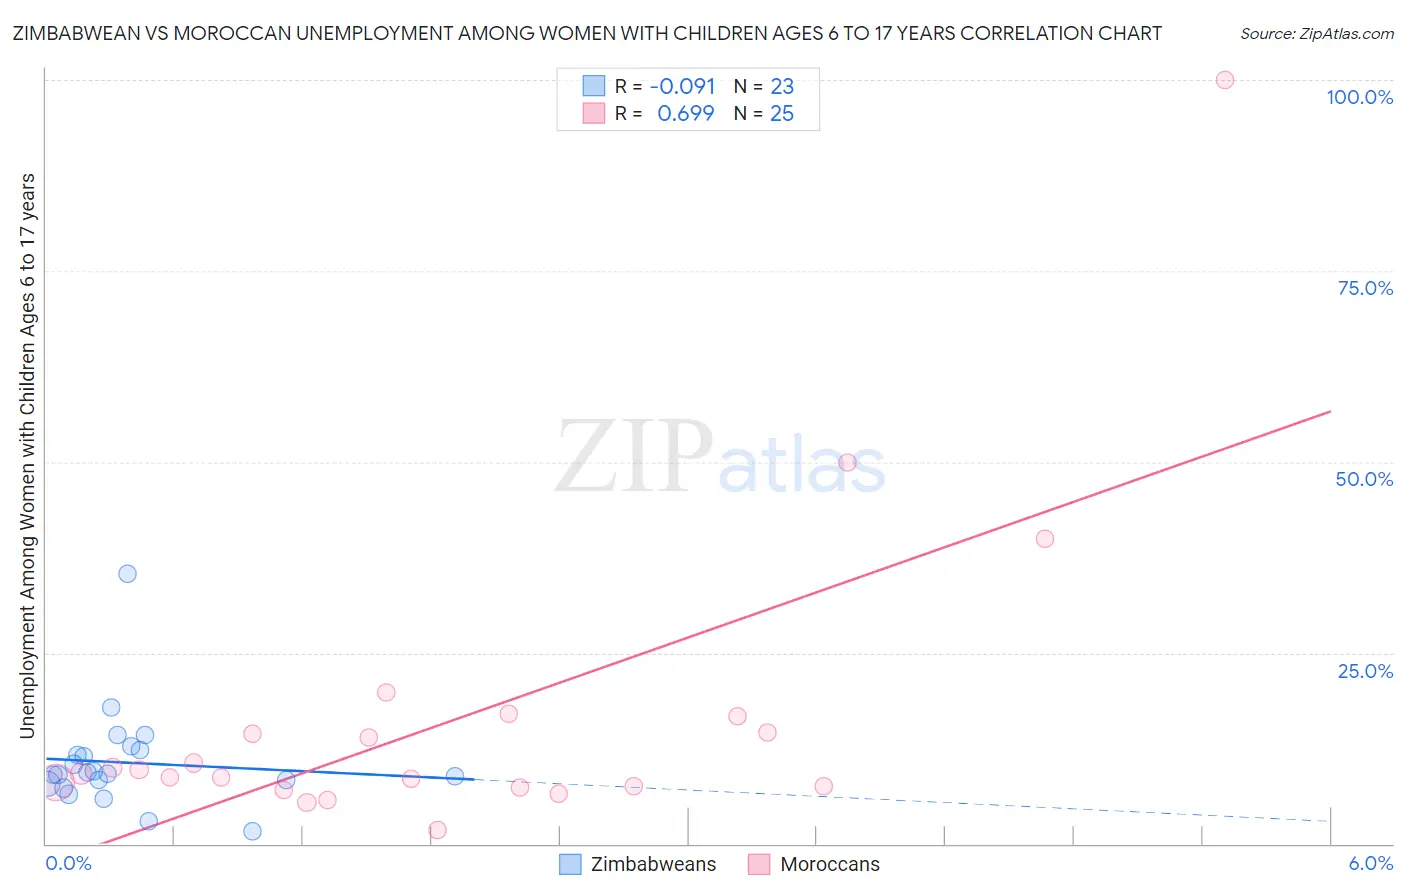 Zimbabwean vs Moroccan Unemployment Among Women with Children Ages 6 to 17 years